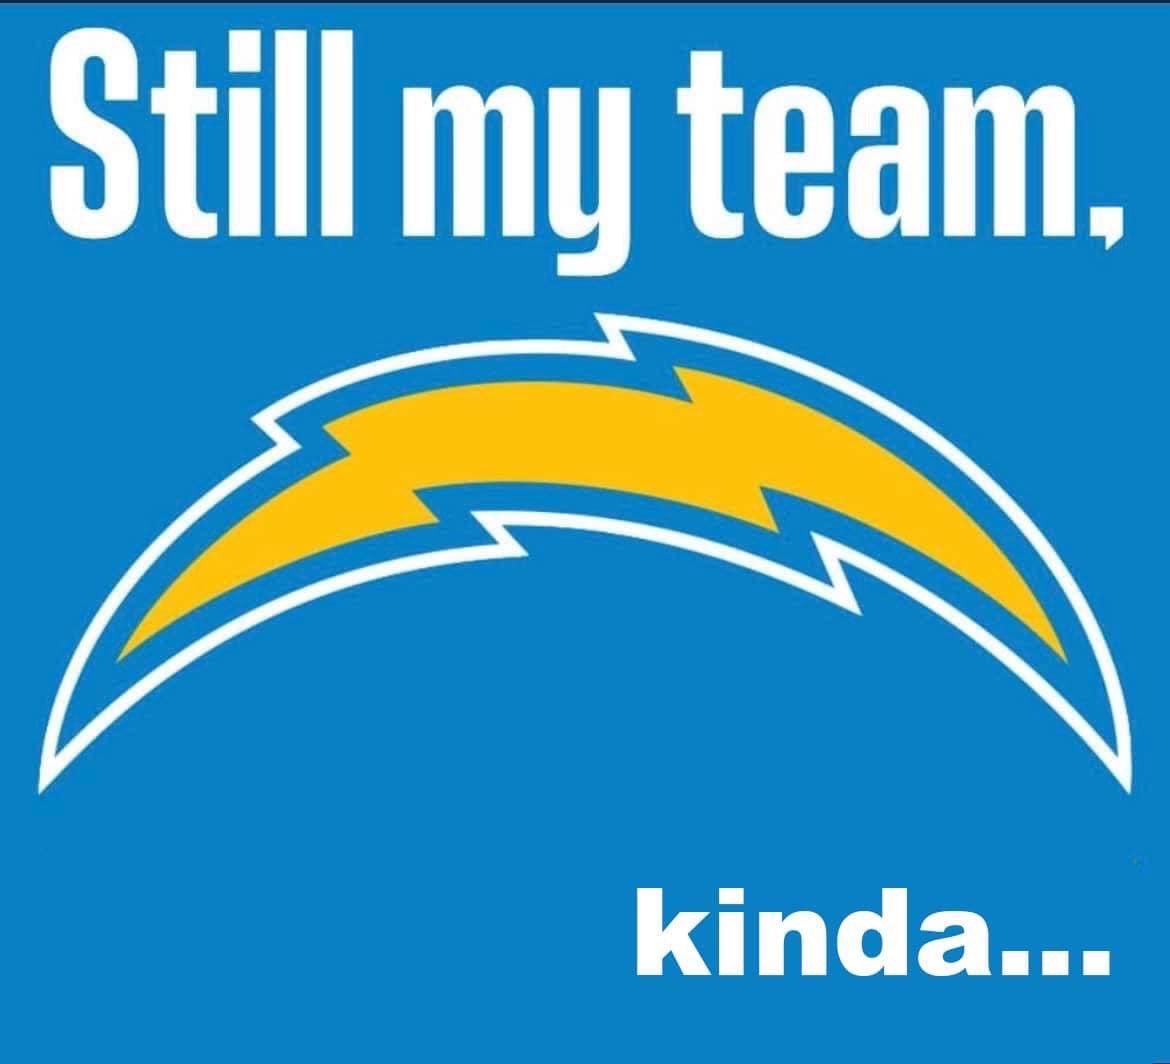 So I don’t know if we’re going to see #BoltHero again this season.

I hope so. 

The @Chargers is still my team, and I’ll still be here. There’s still the Chargers PR team and I’ve seen some AI artwork out there, so there’s other options to go to hype this team on gameday…